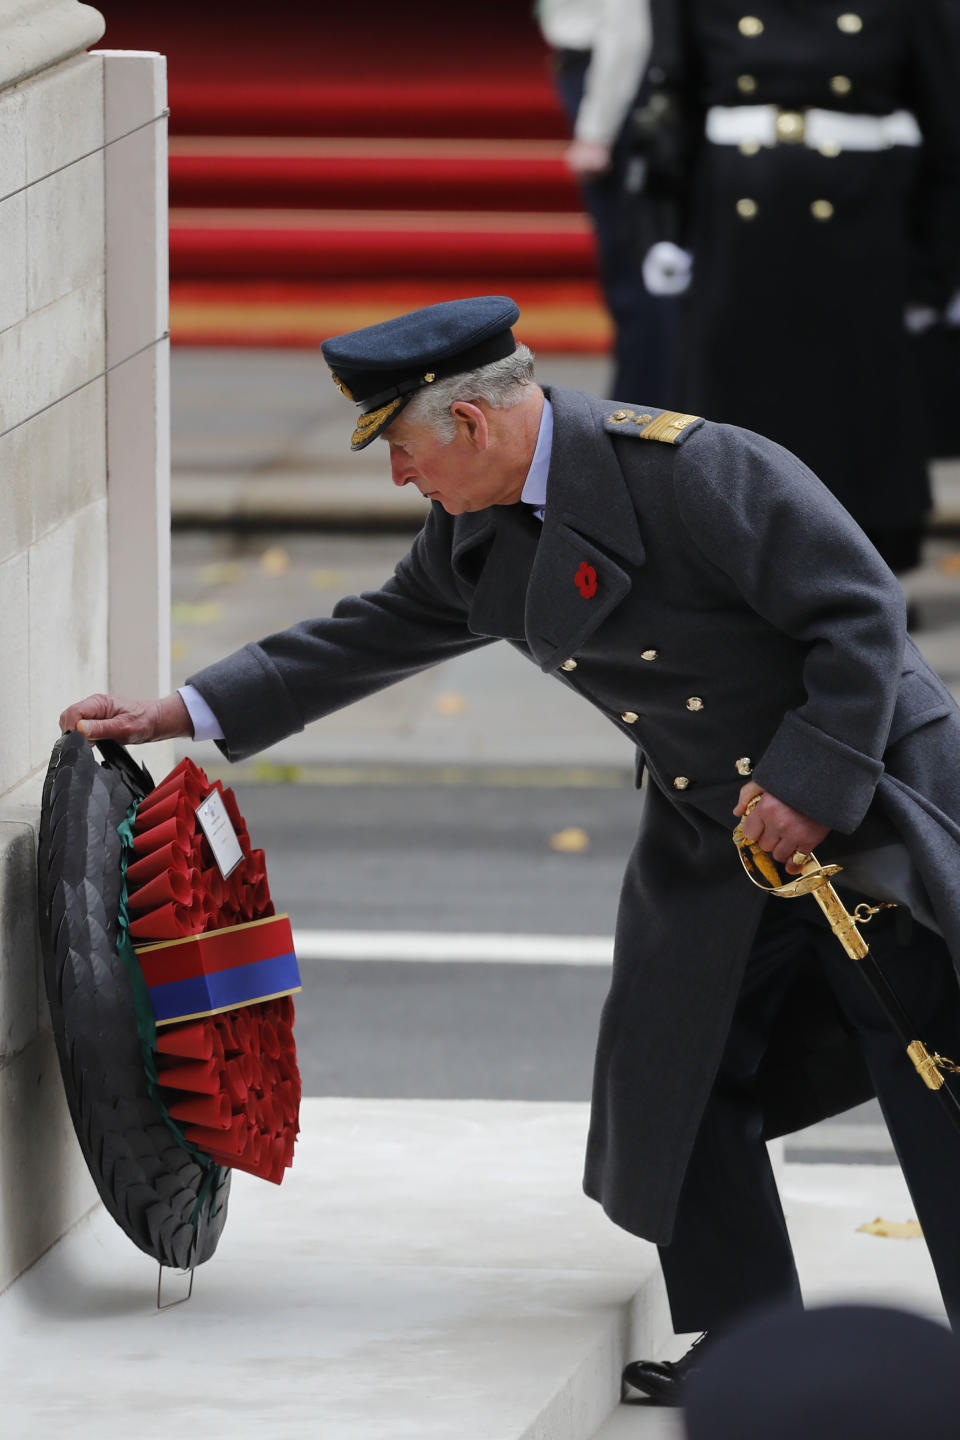 Prince Charles laid the wreath at Remembrance Day in London last year. Source: Getty